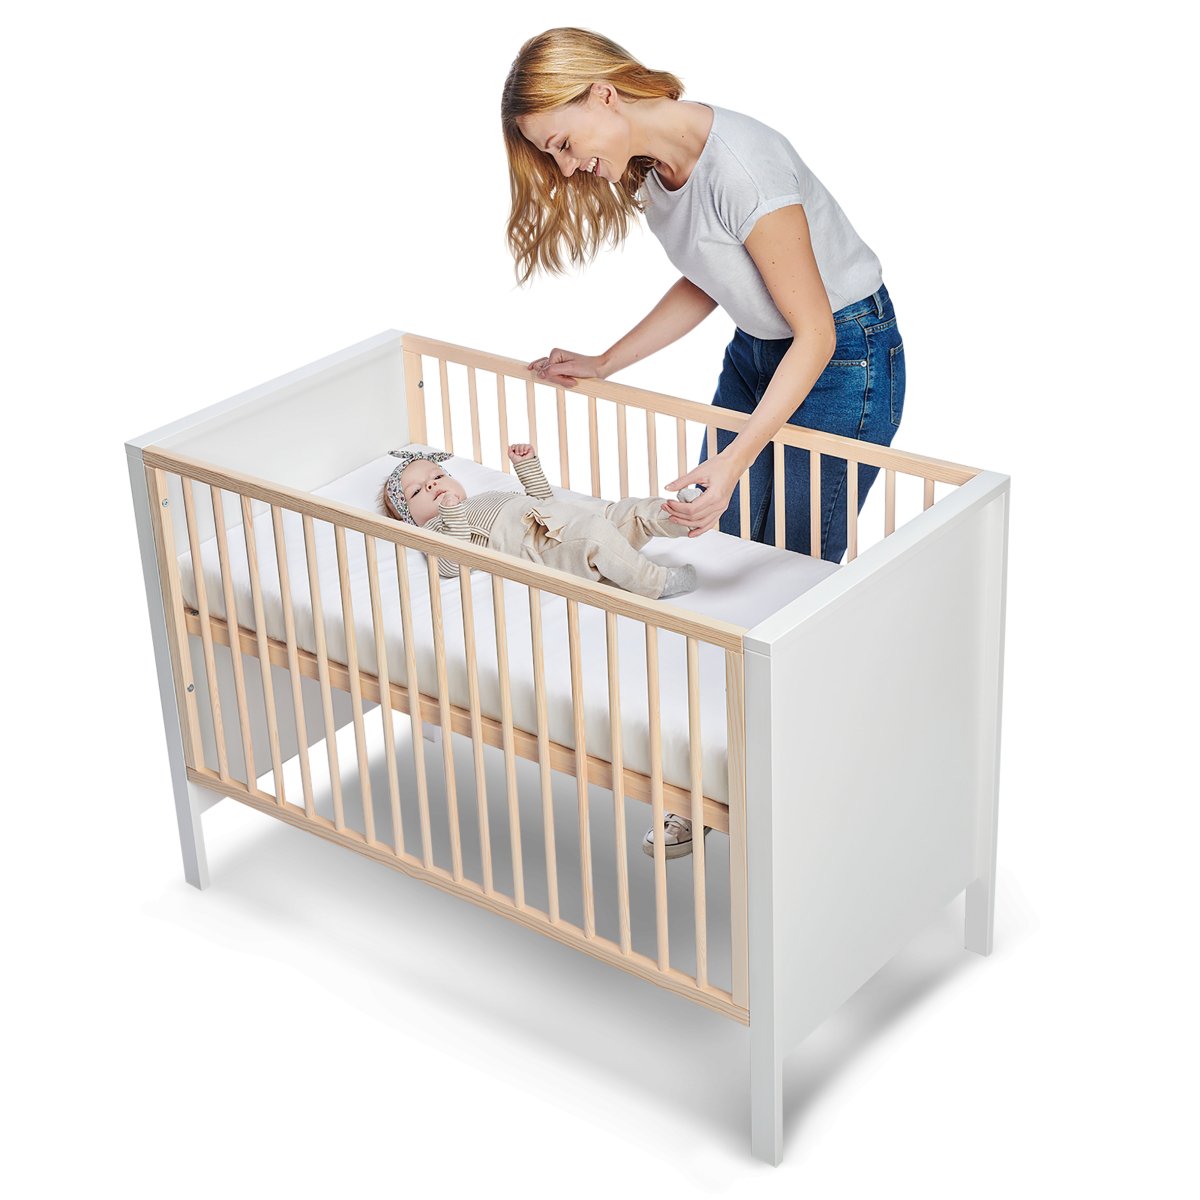 Mother tucking baby into Kinderkraft Baby Cot MIA with mattress.